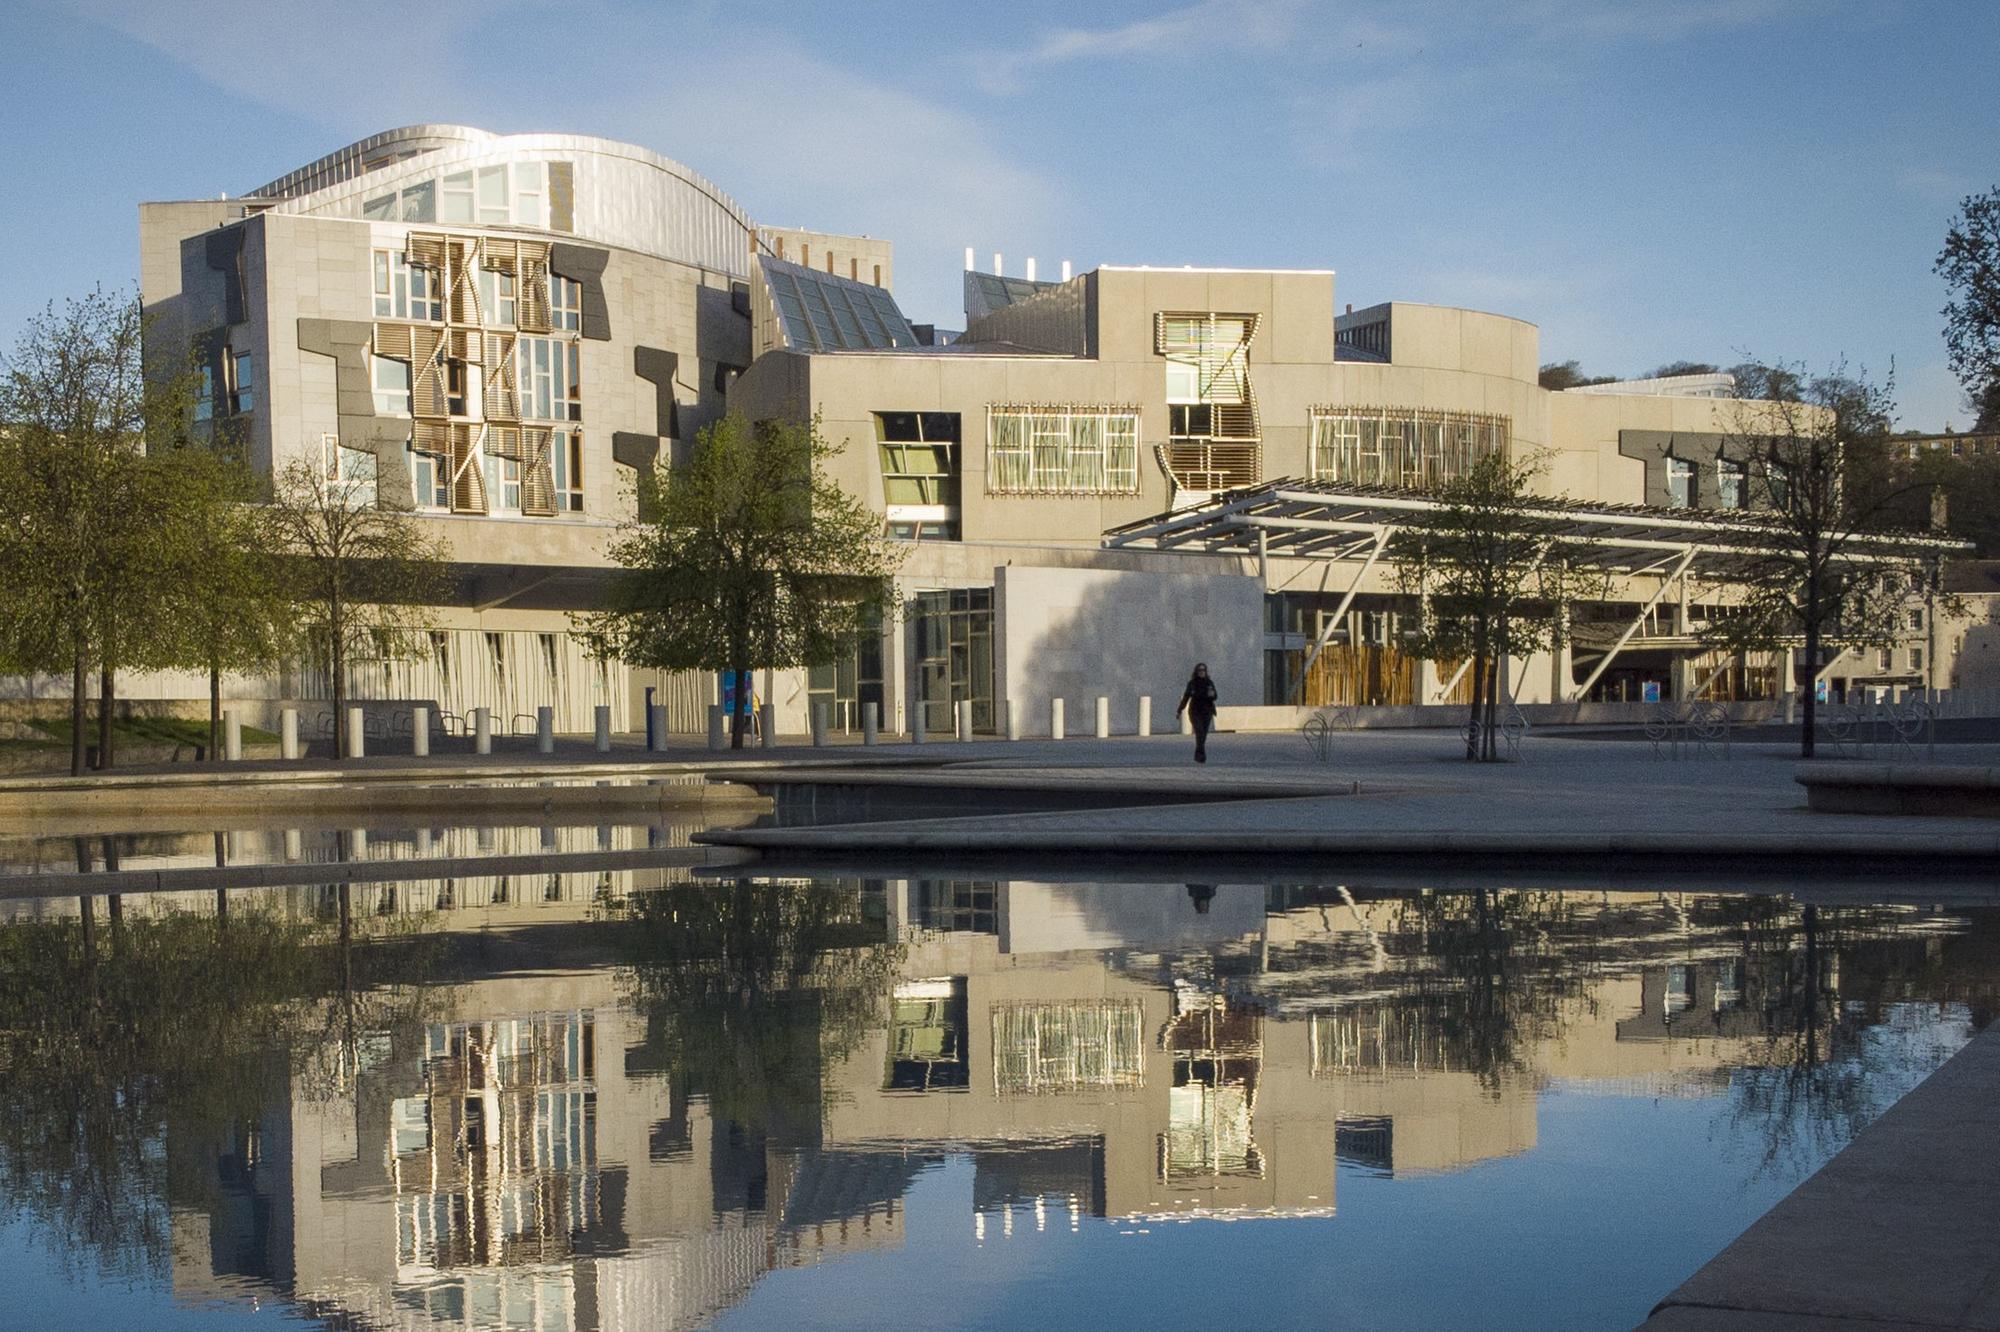 brian monteith: just how bad can holyrood get if we don’t discuss its future?